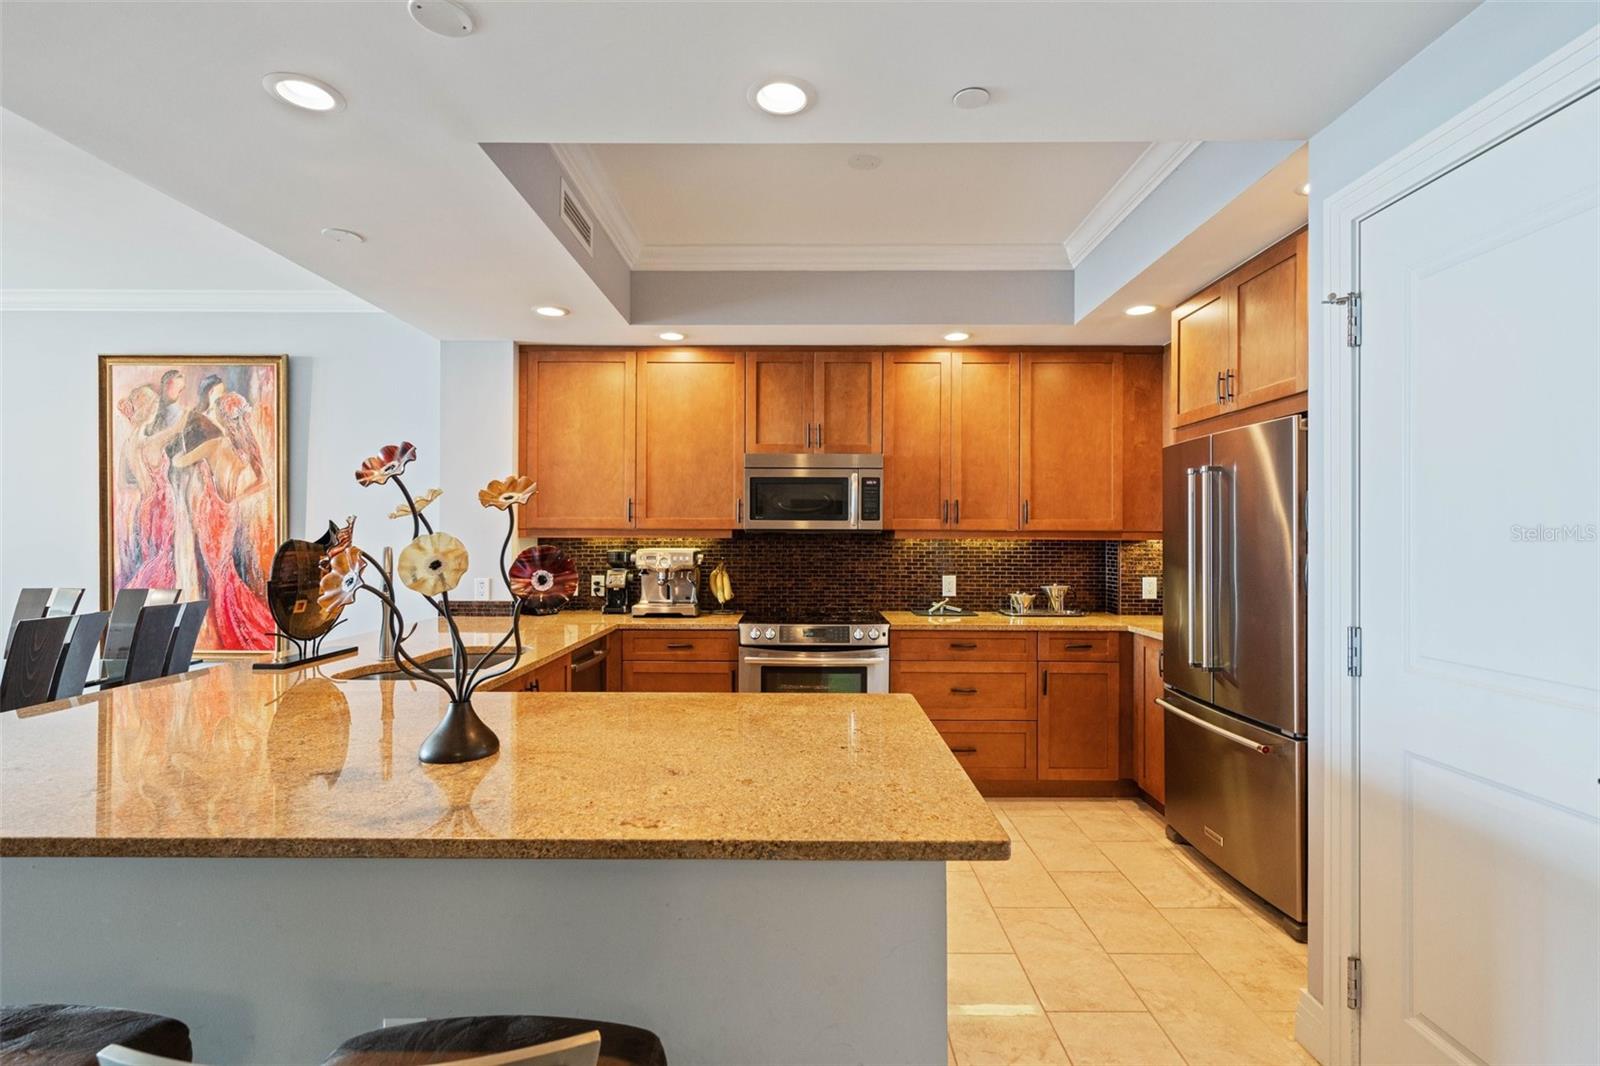 Other angle view of kitchen, large, plenty of countertops to entertain your guests !